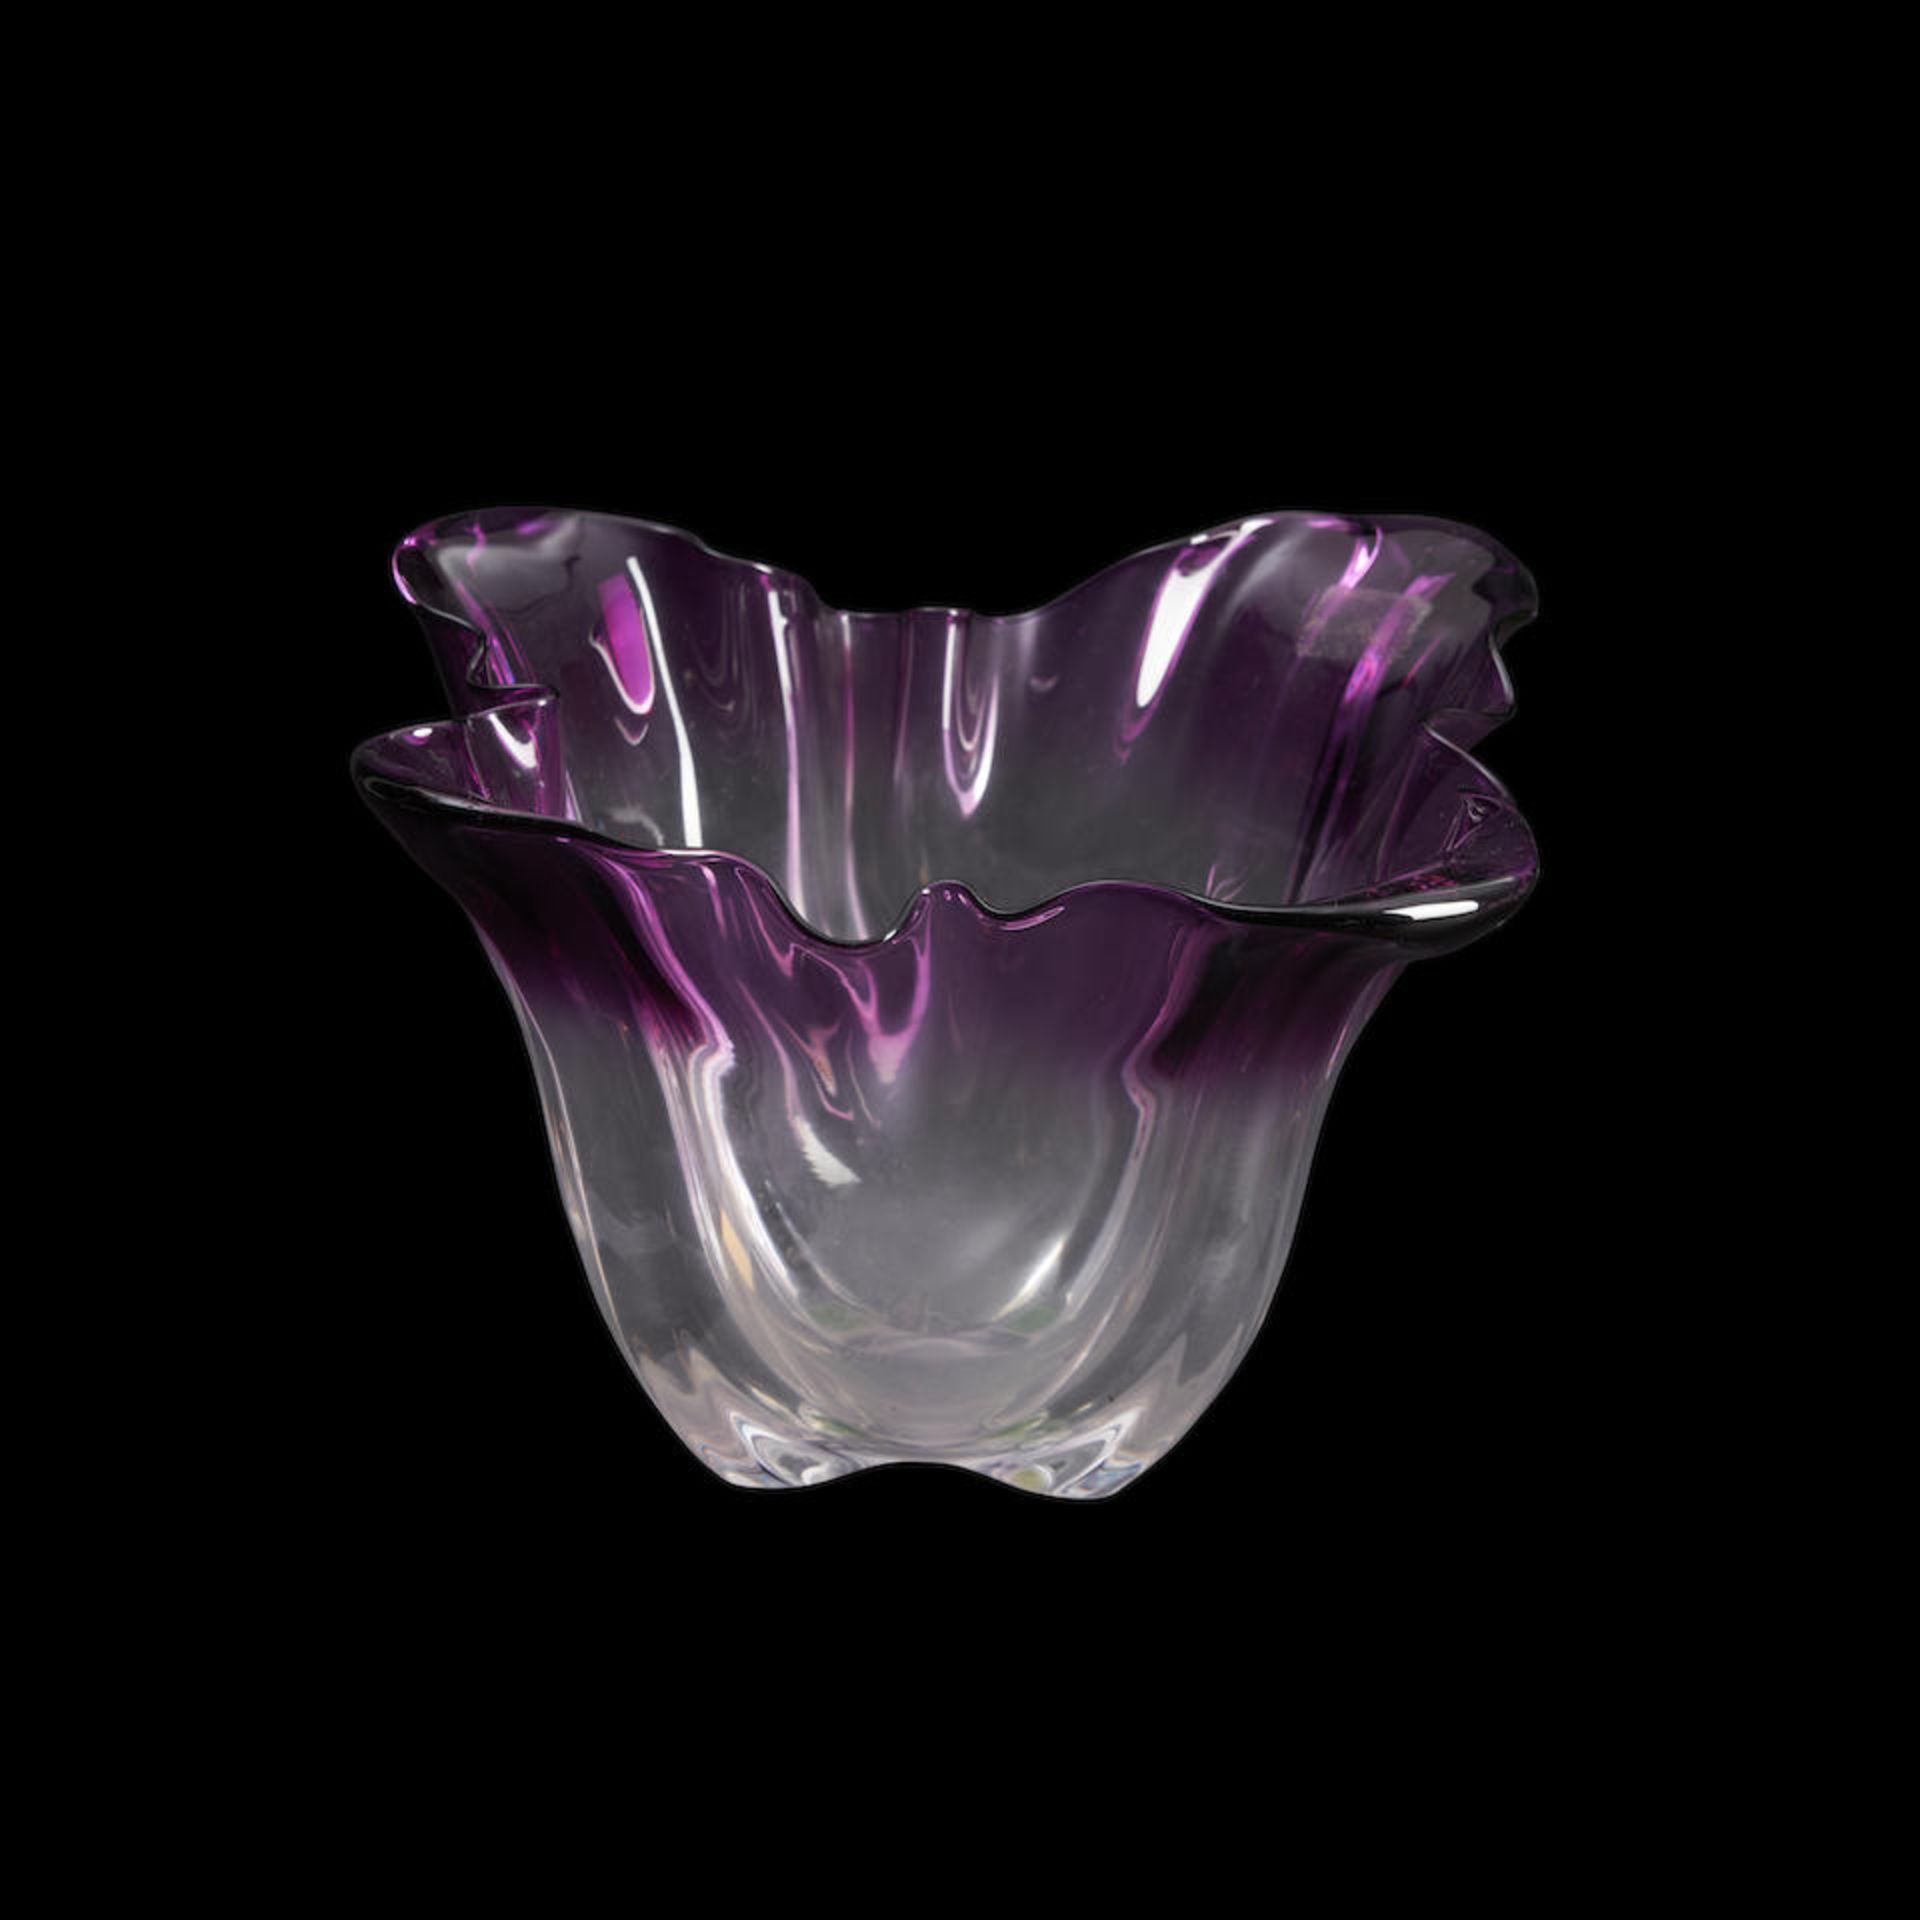 STEUBEN 'GROTESQUE' ART GLASS BOWL, Corning, New York, c. 1930, unmarked, ht. 4 3/4 in.Literatur...